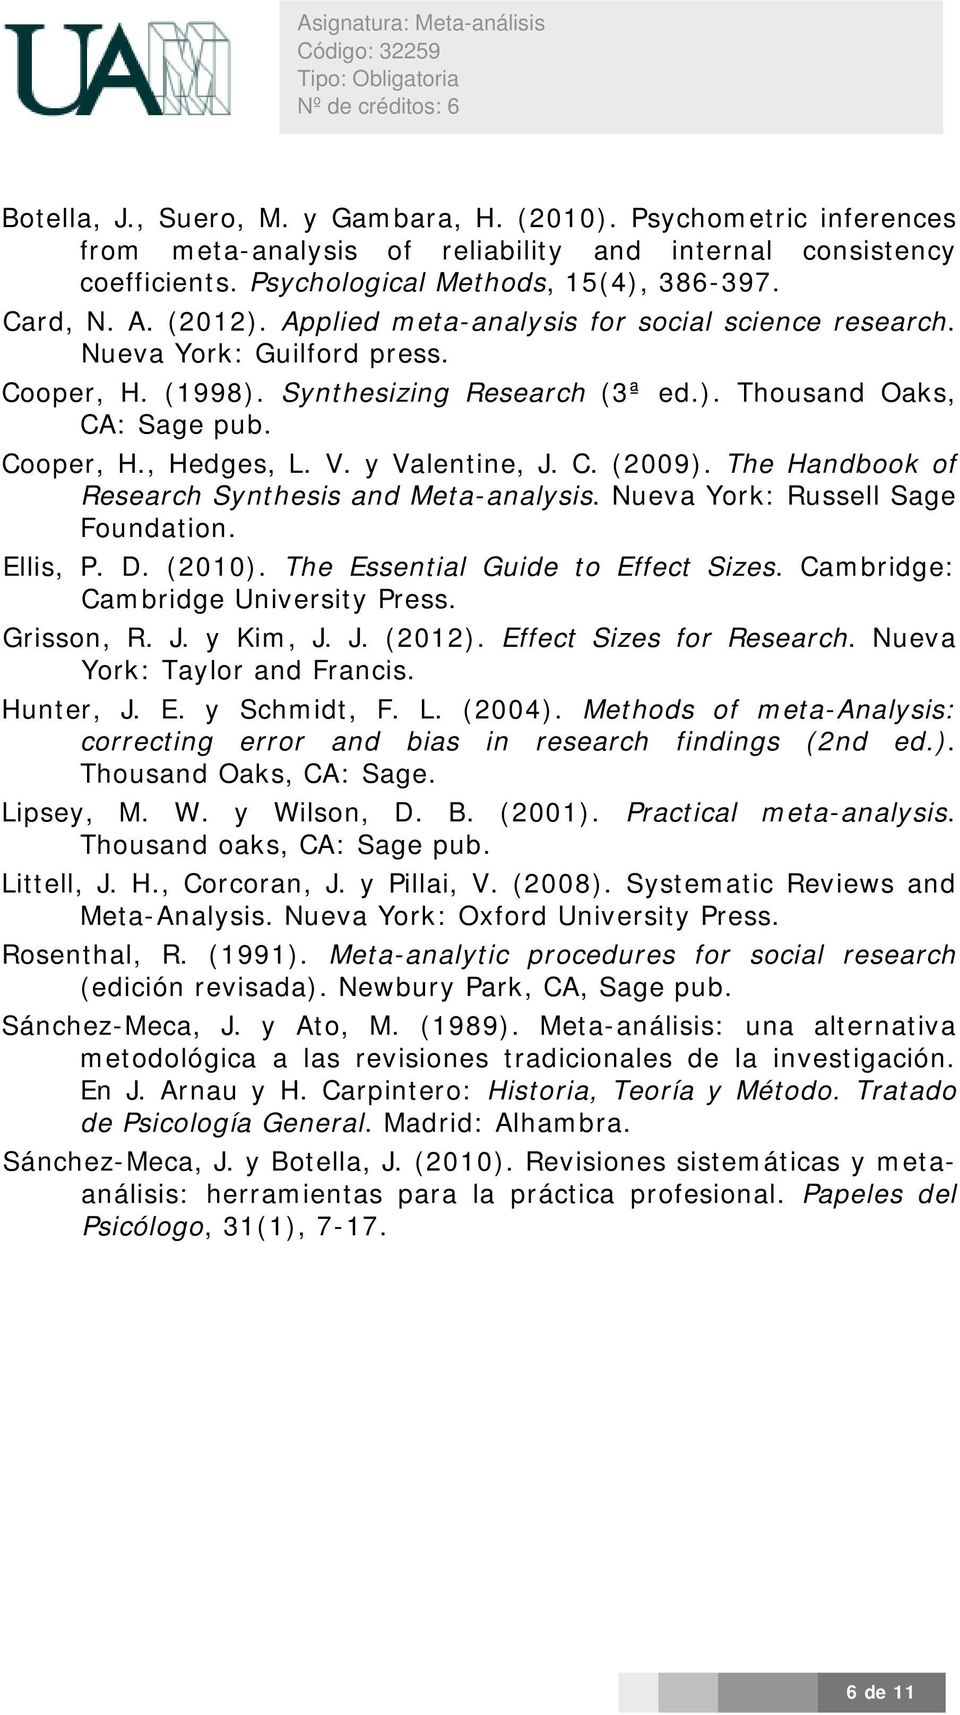 C. (2009). The Handbook of Research Synthesis and Meta-analysis. Nueva York: Russell Sage Foundation. Ellis, P. D. (2010). The Essential Guide to Effect Sizes. Cambridge: Cambridge University Press.